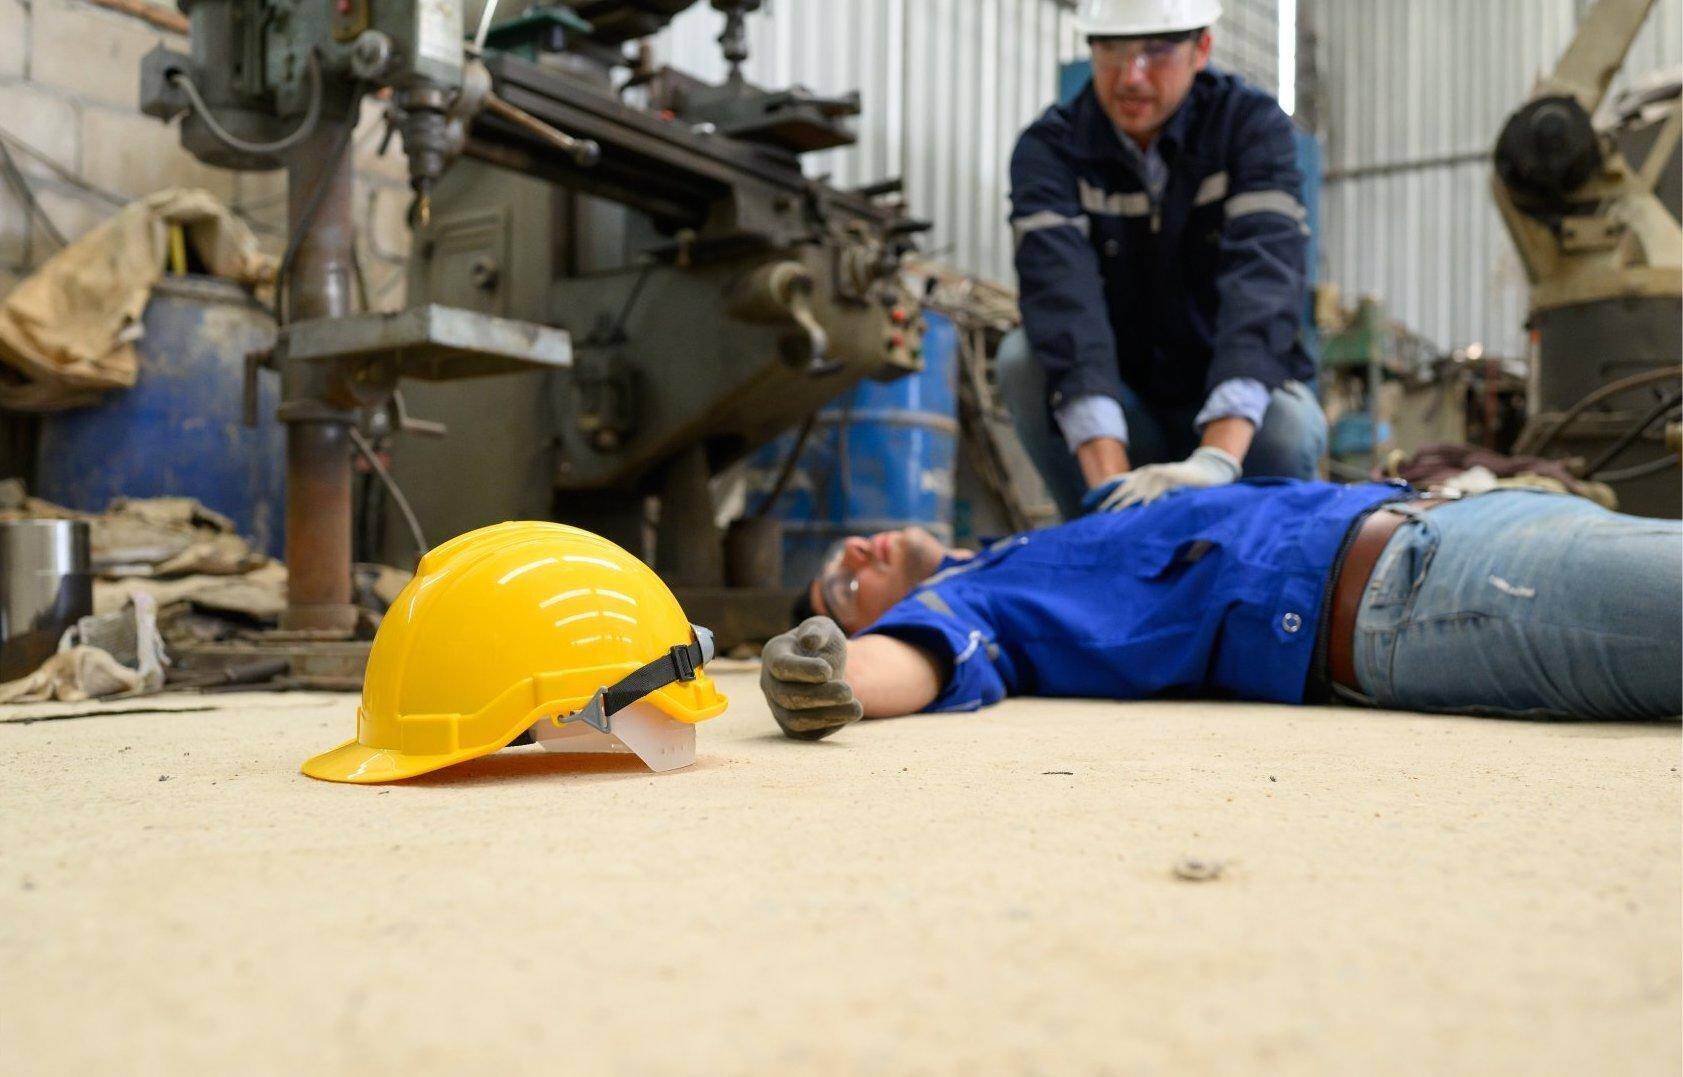 An unconscious man who has been injured on the job who will file for workers compensation in Wilmington Island, Georgia